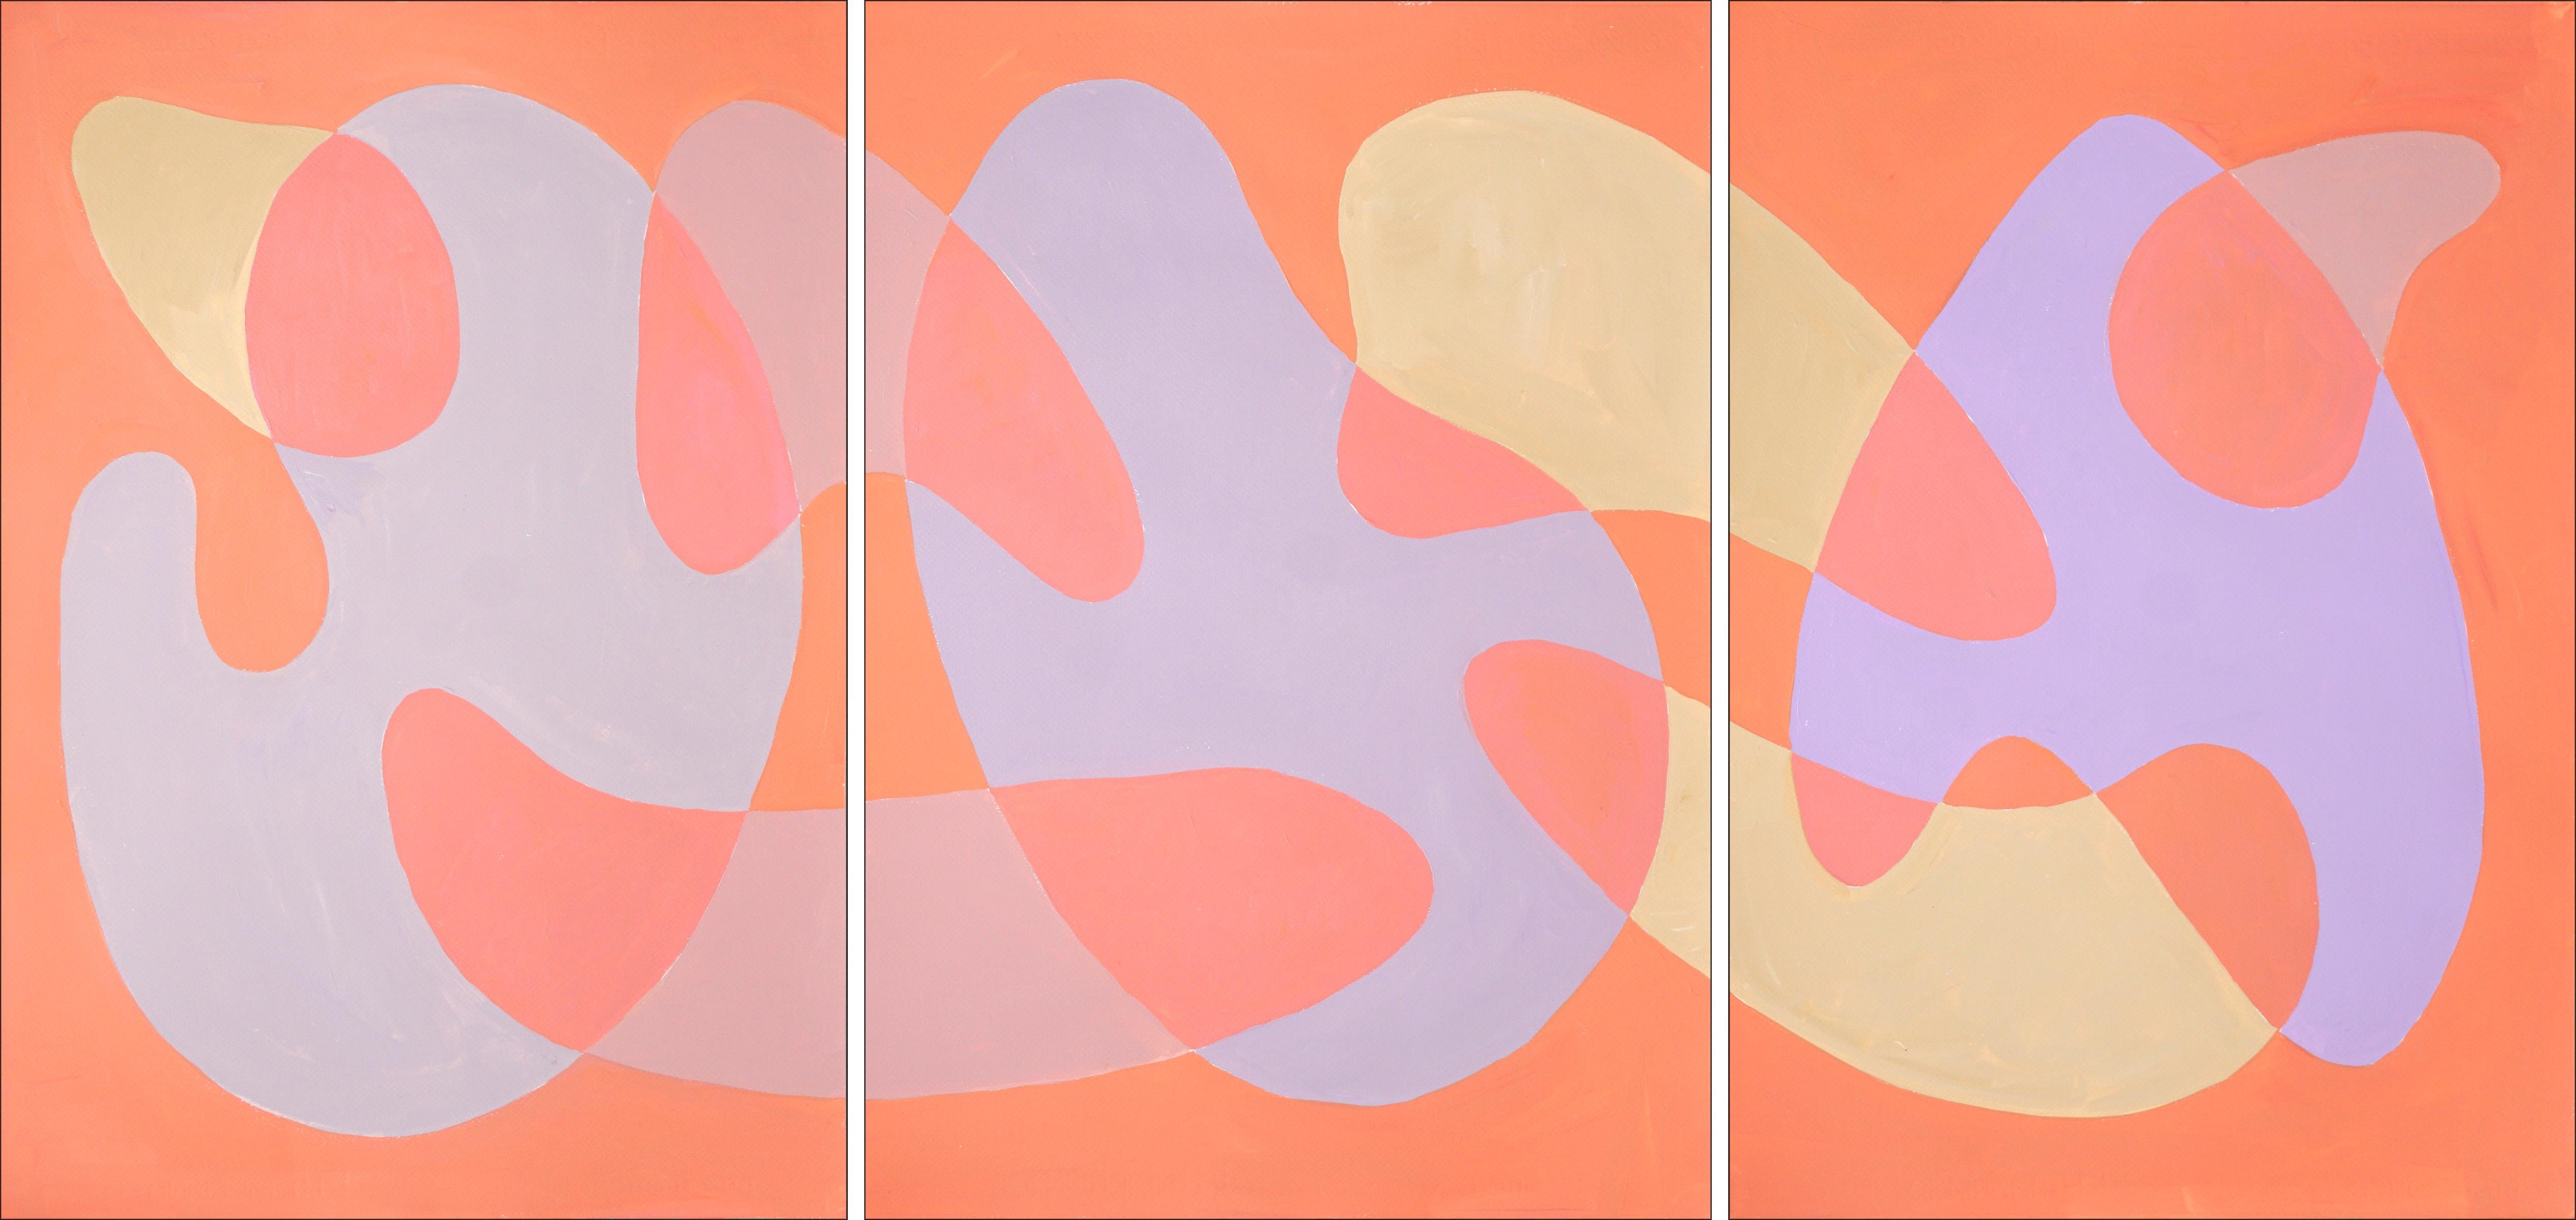 Ryan Rivadeneyra Abstract Painting - Coral Reef Abstraction, Pastel Tones Triptych Pink and Mauve, Post-Modern Shapes